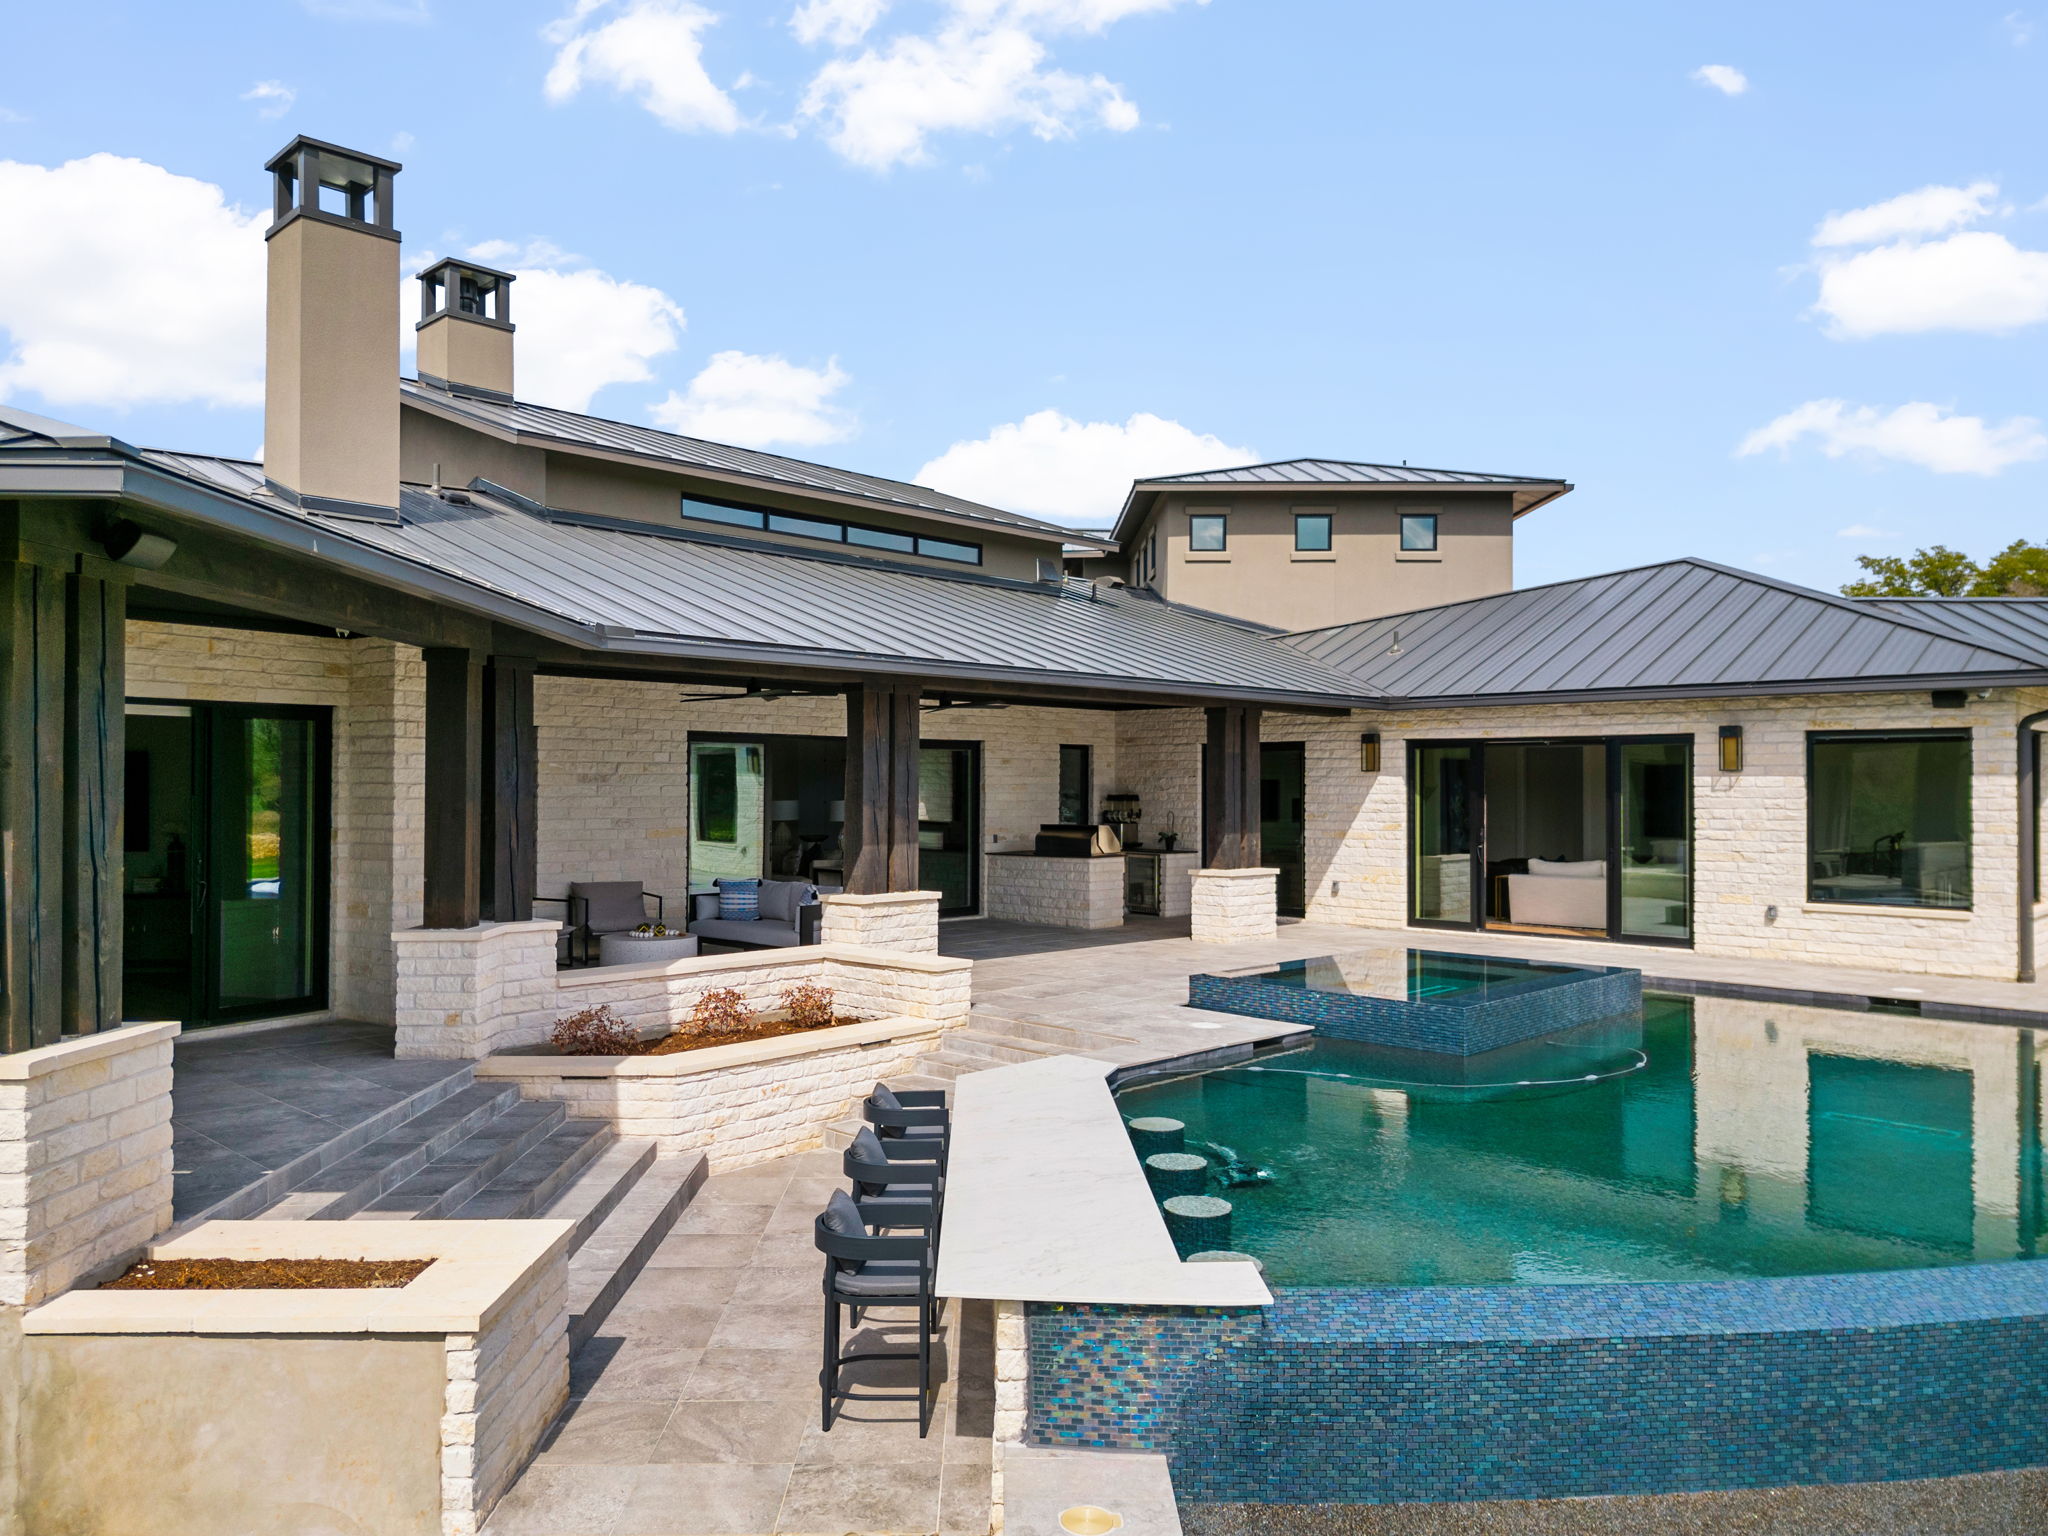 Quality craftsmanship matters in Austin's competitive real estate